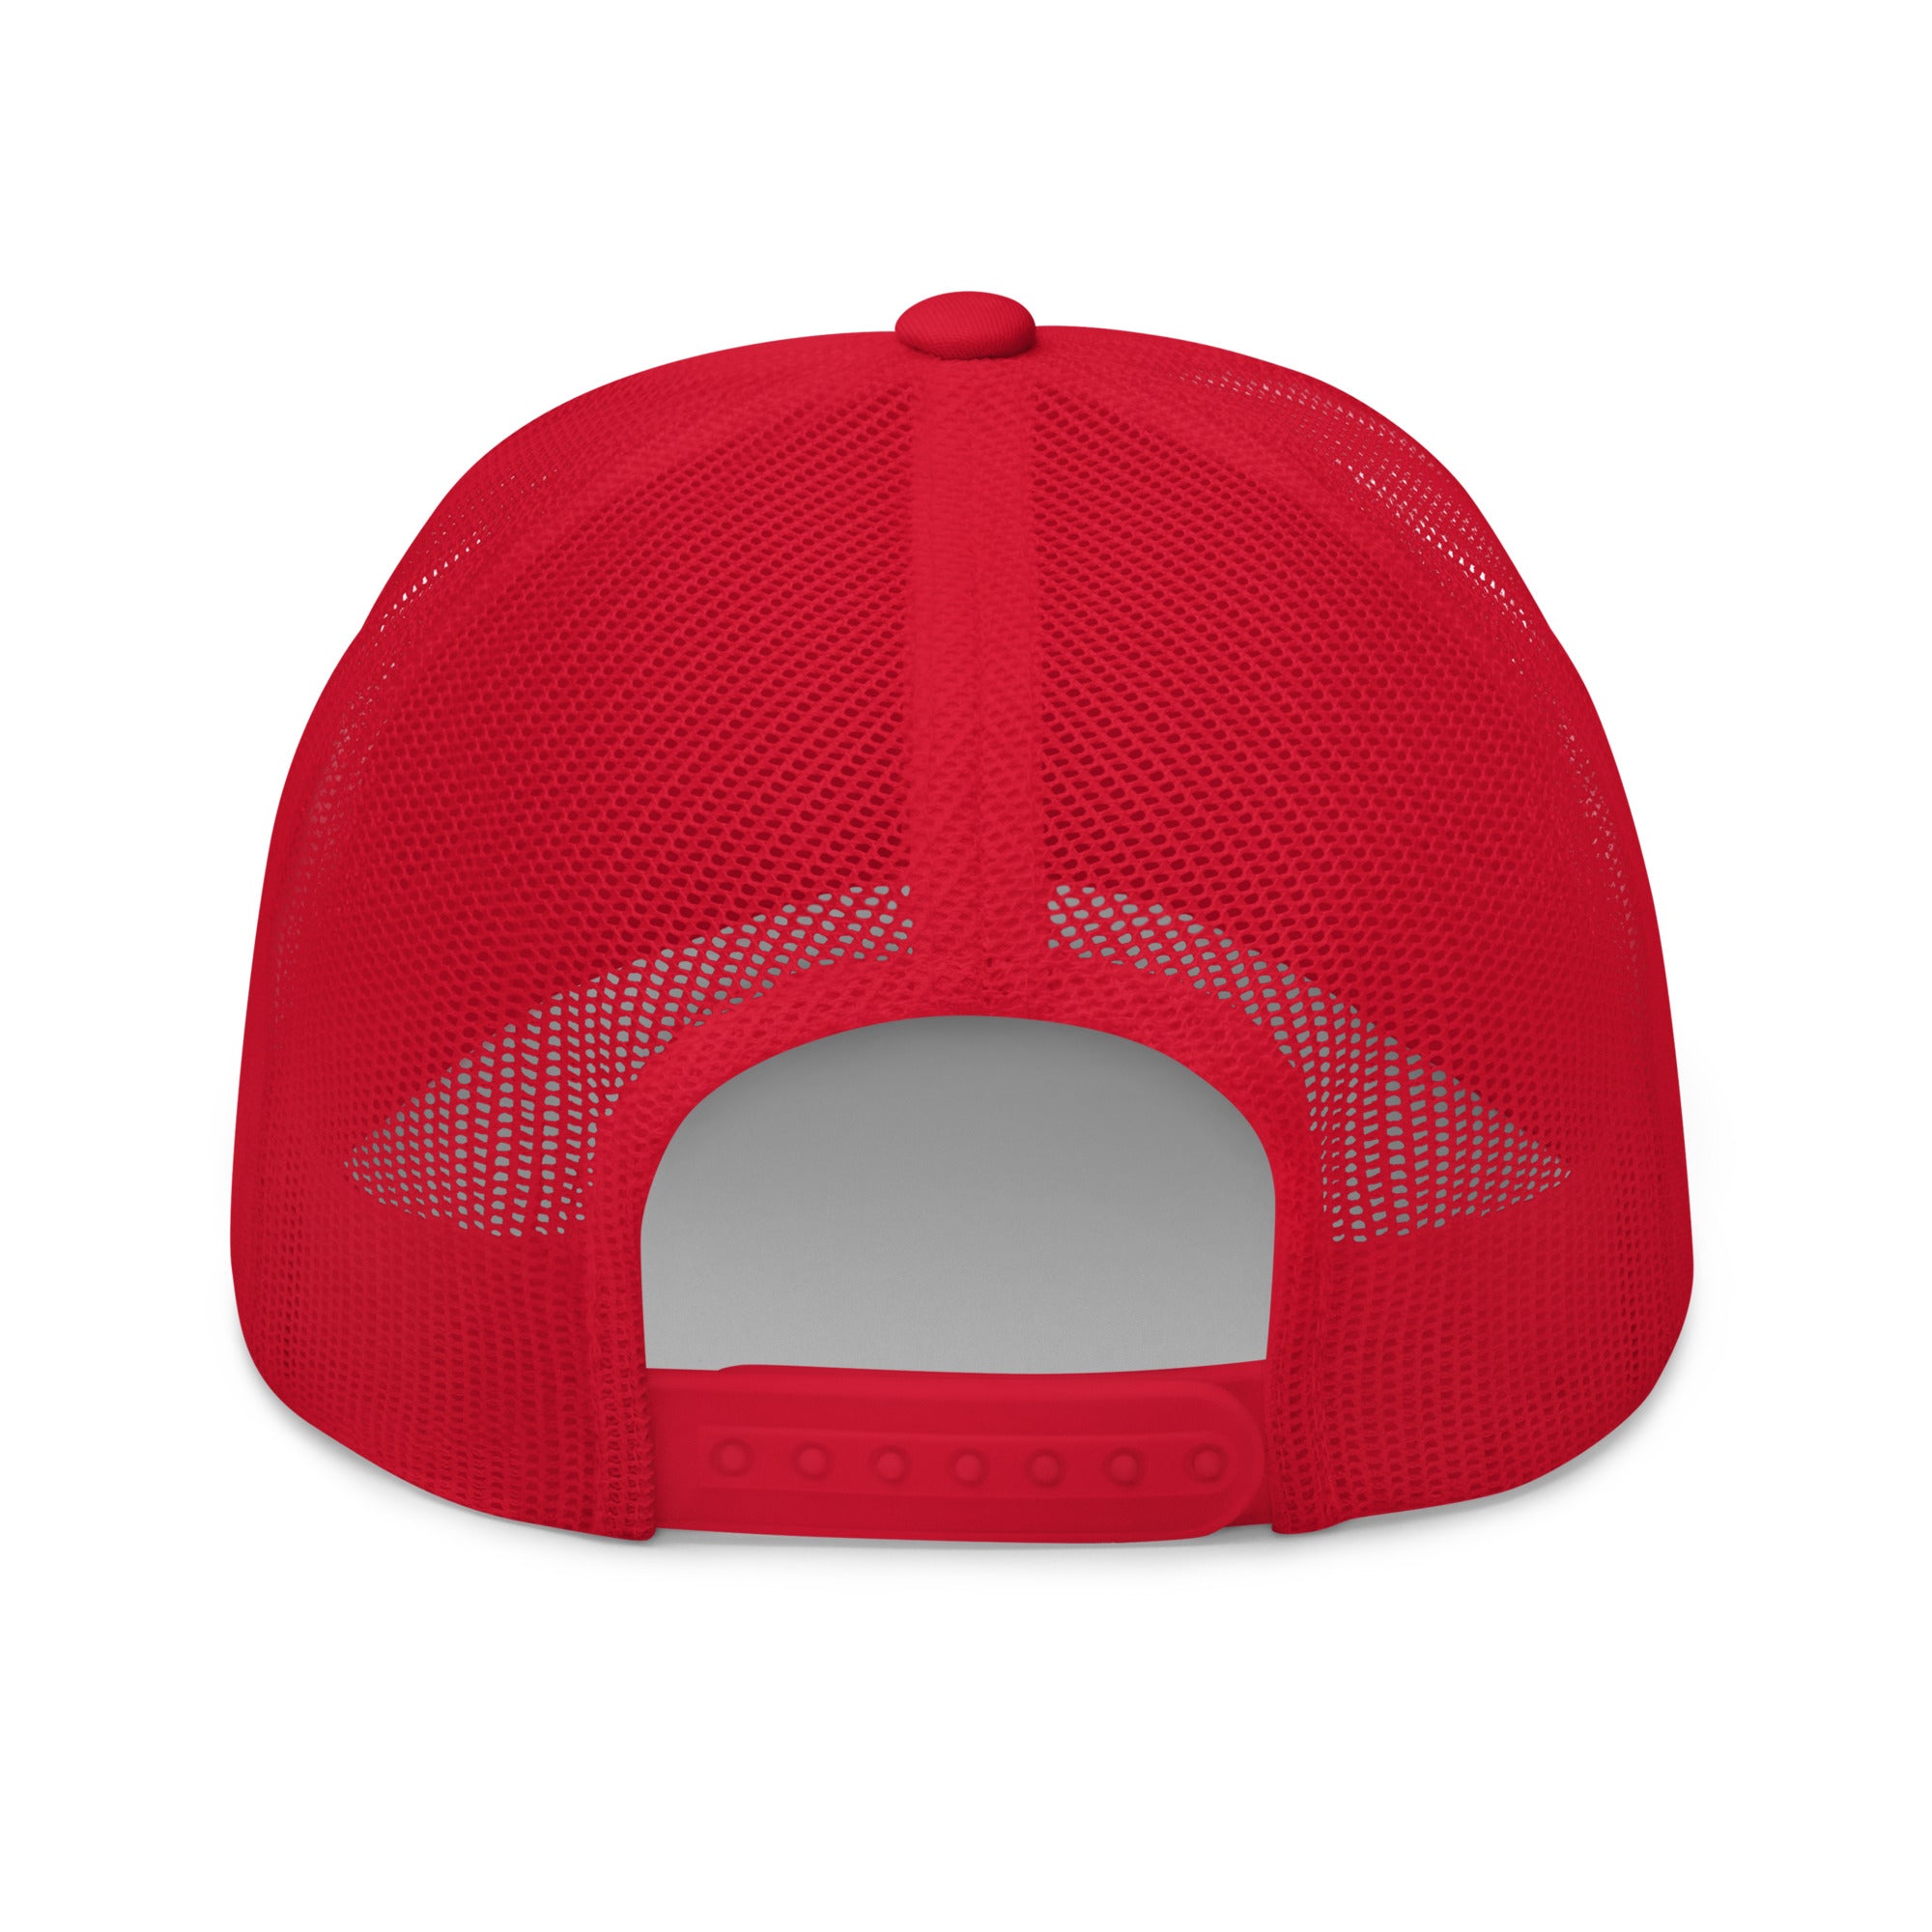 Bitcoin Merchandise - The Bitcoin Gothic Trucker Hat has mesh back panels and a snapback closure. Back view.